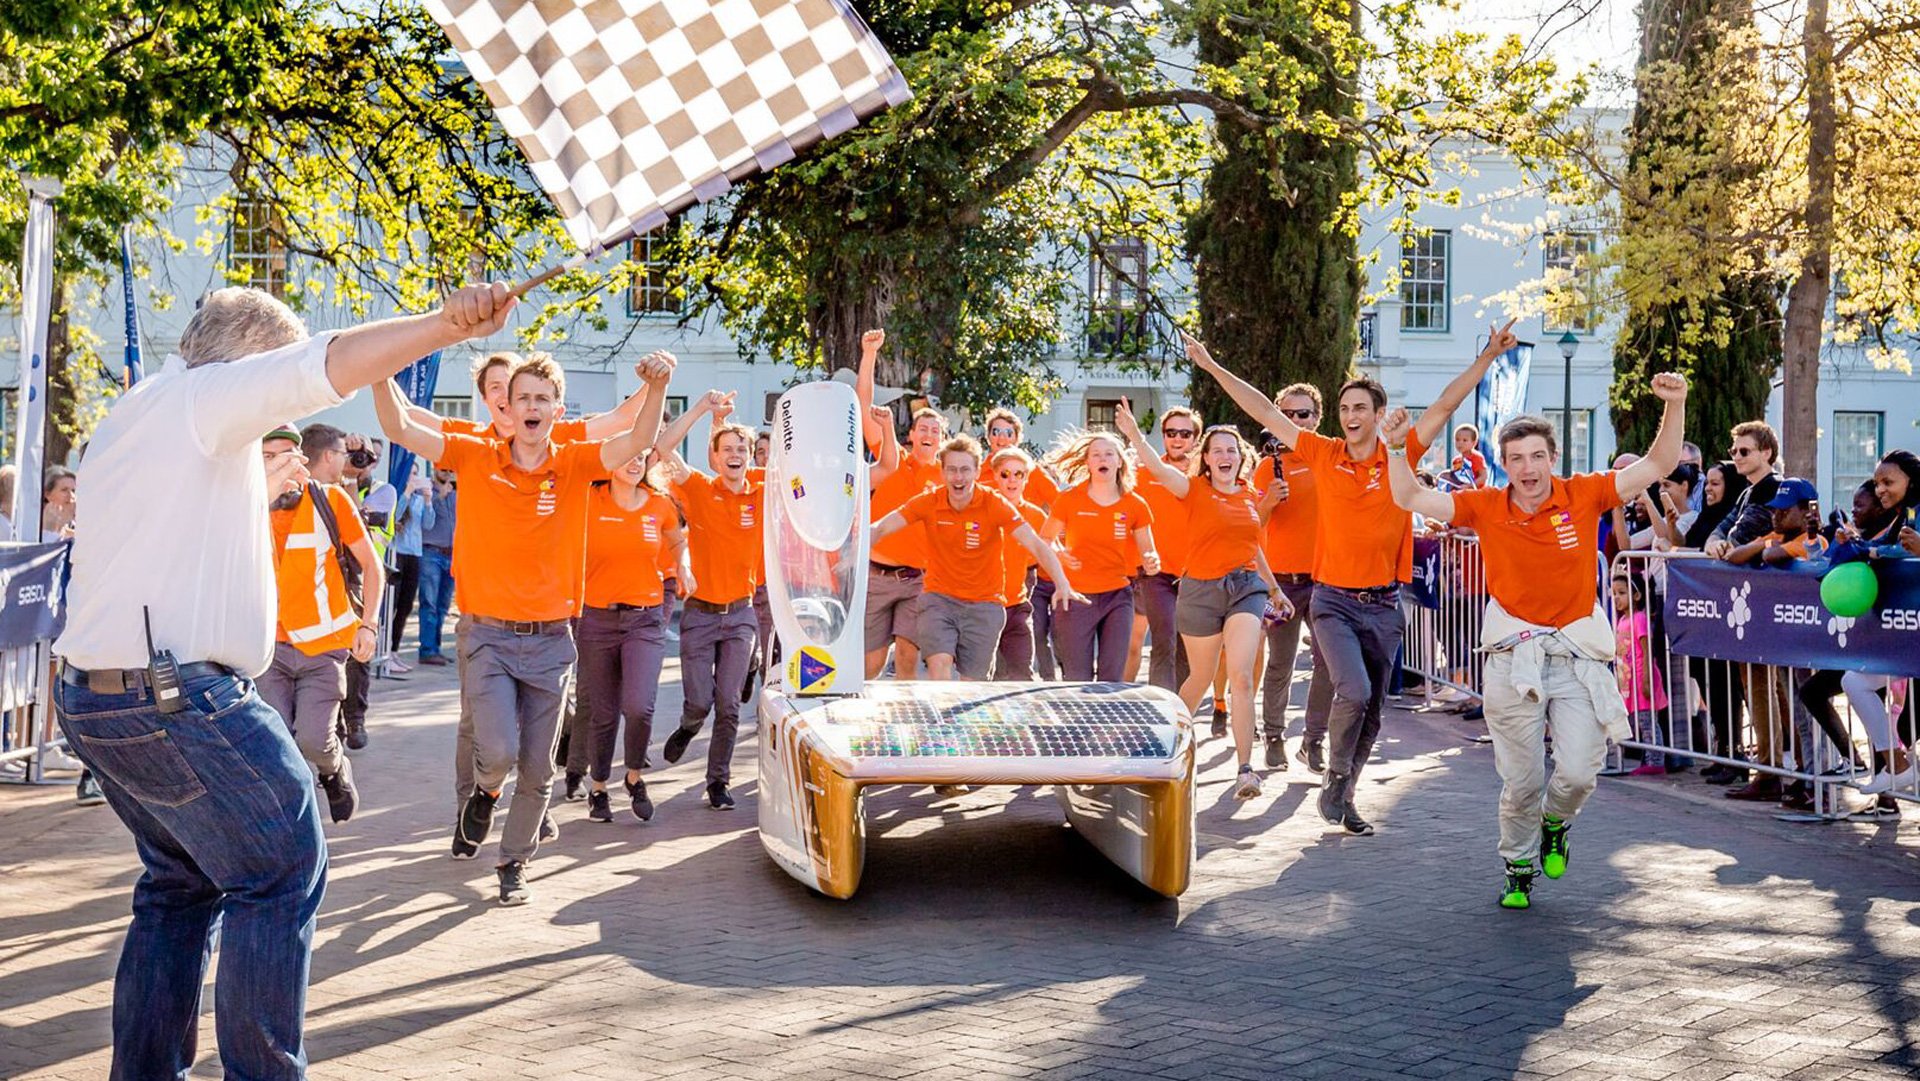 Nuon Solar Team were crowned winners in the solar car race held in South Africa - Nuna9s